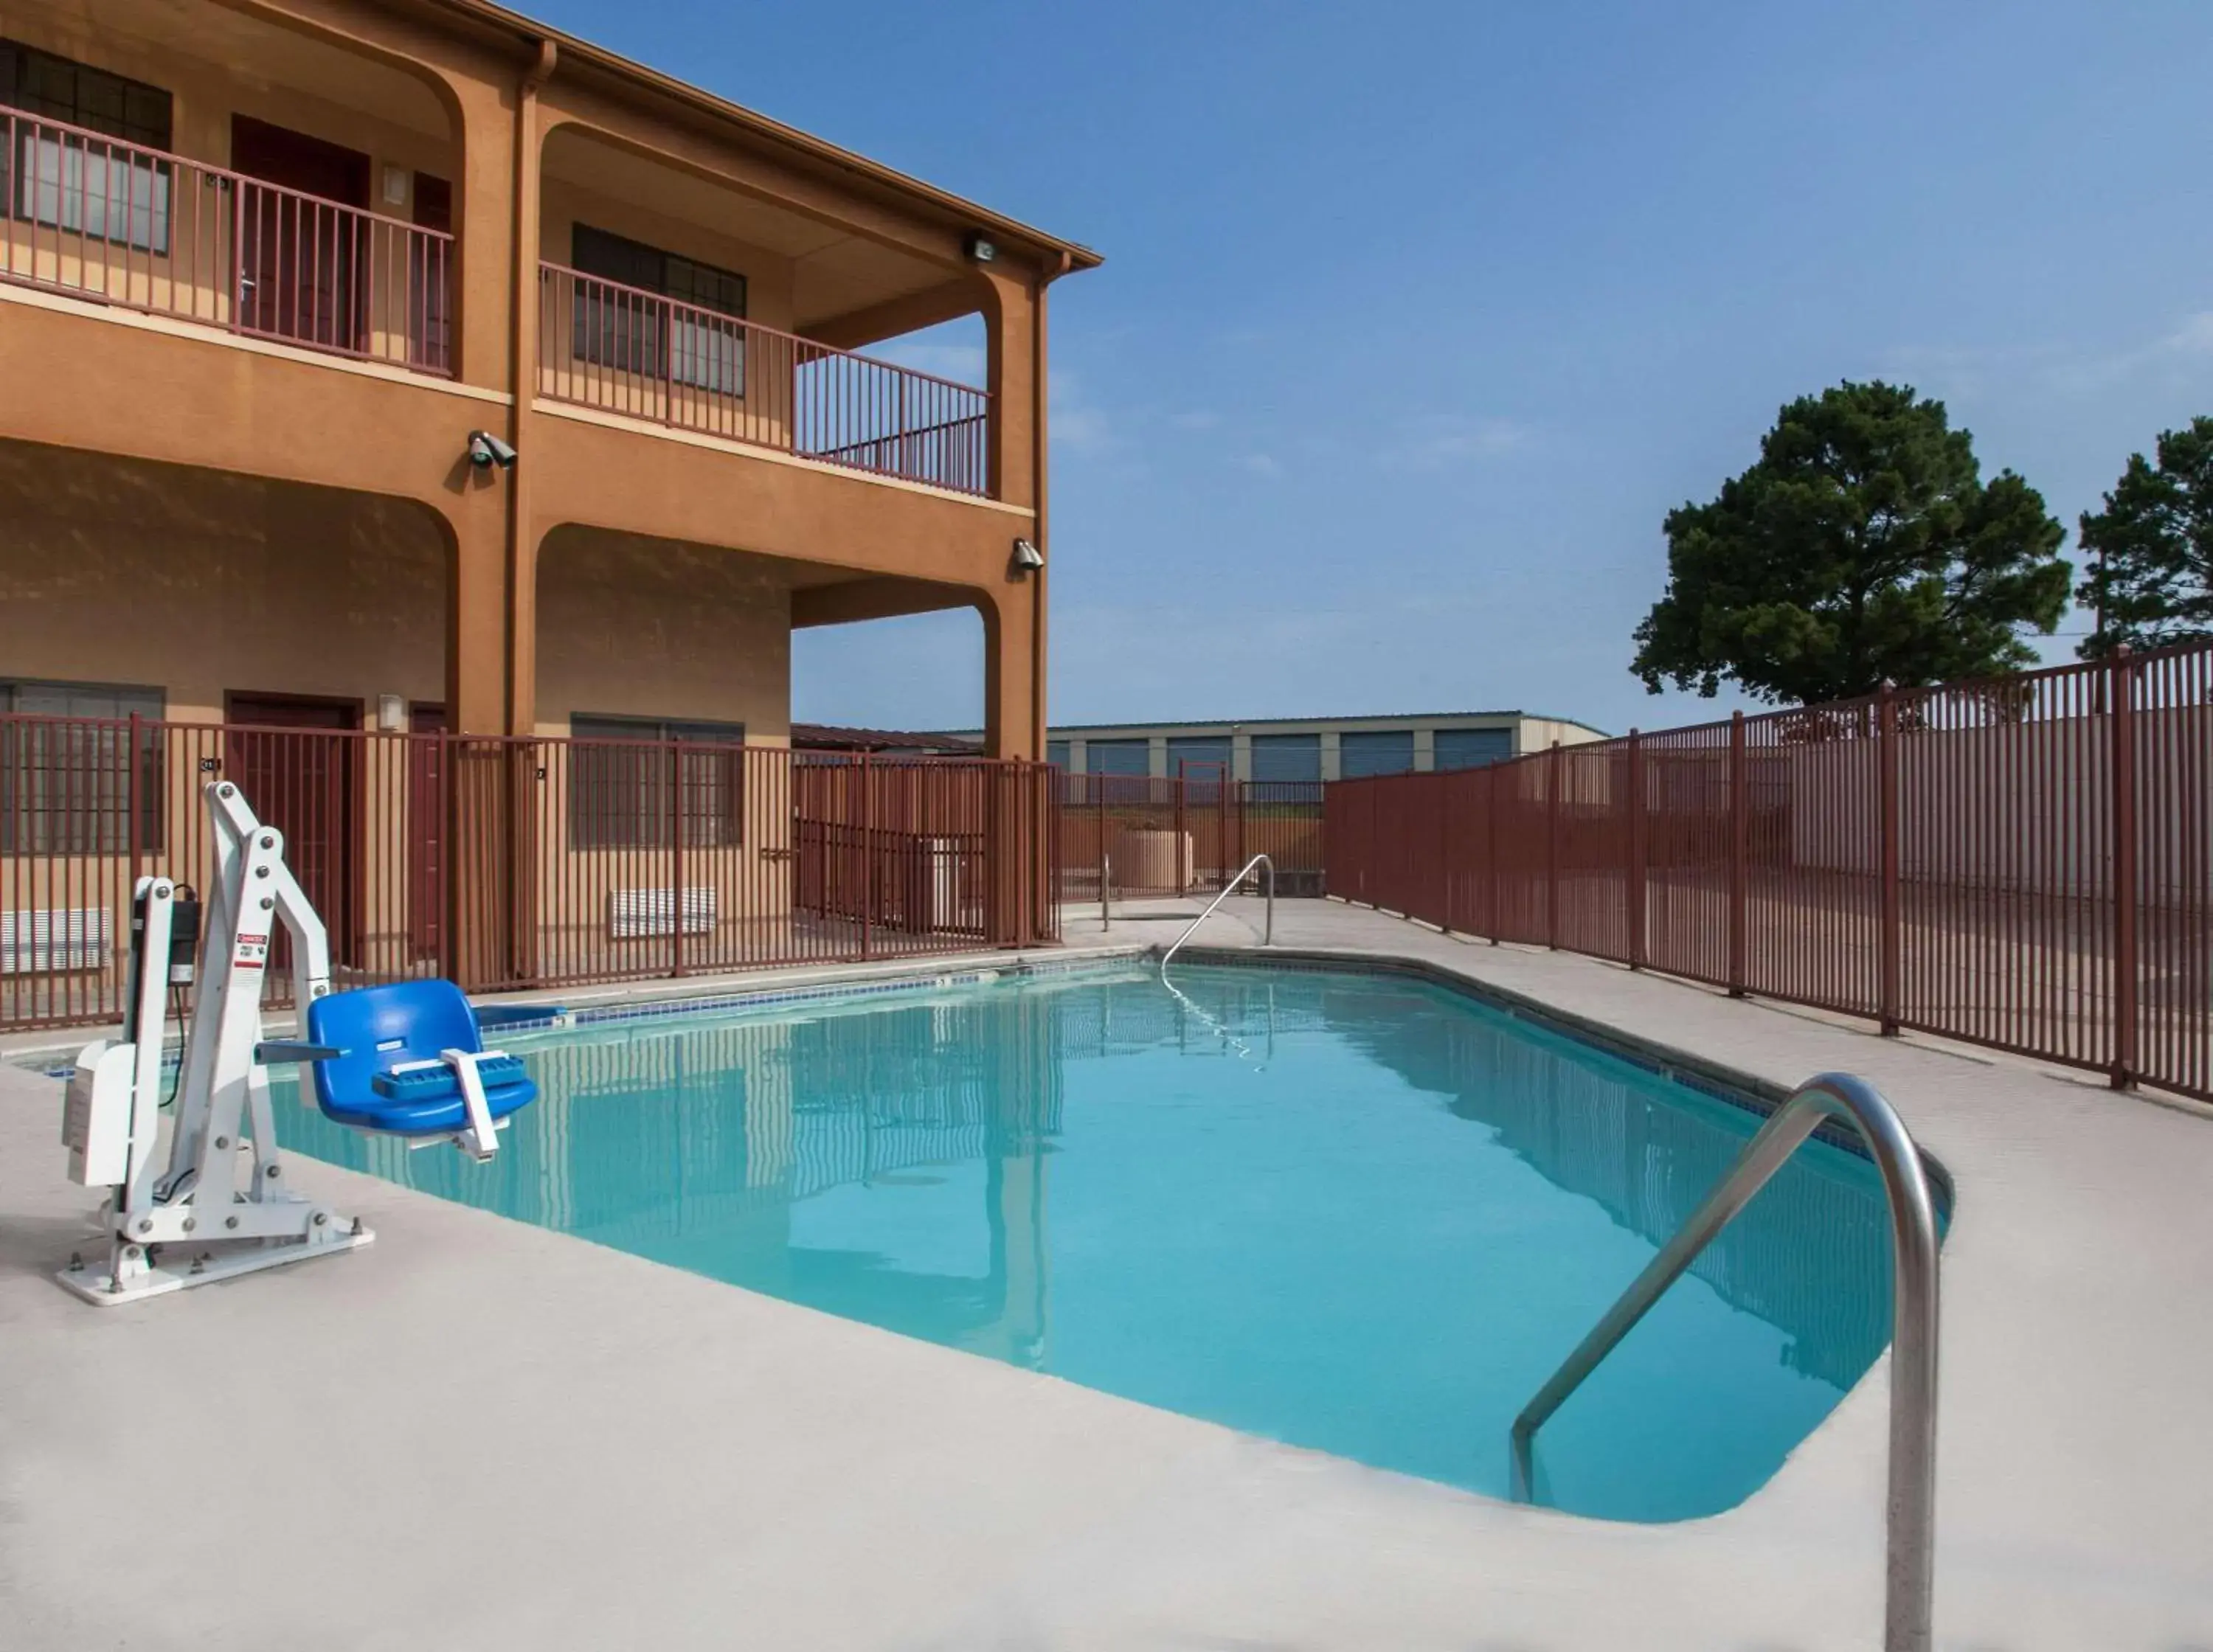 On site, Swimming Pool in Super 8 by Wyndham Bastrop TX